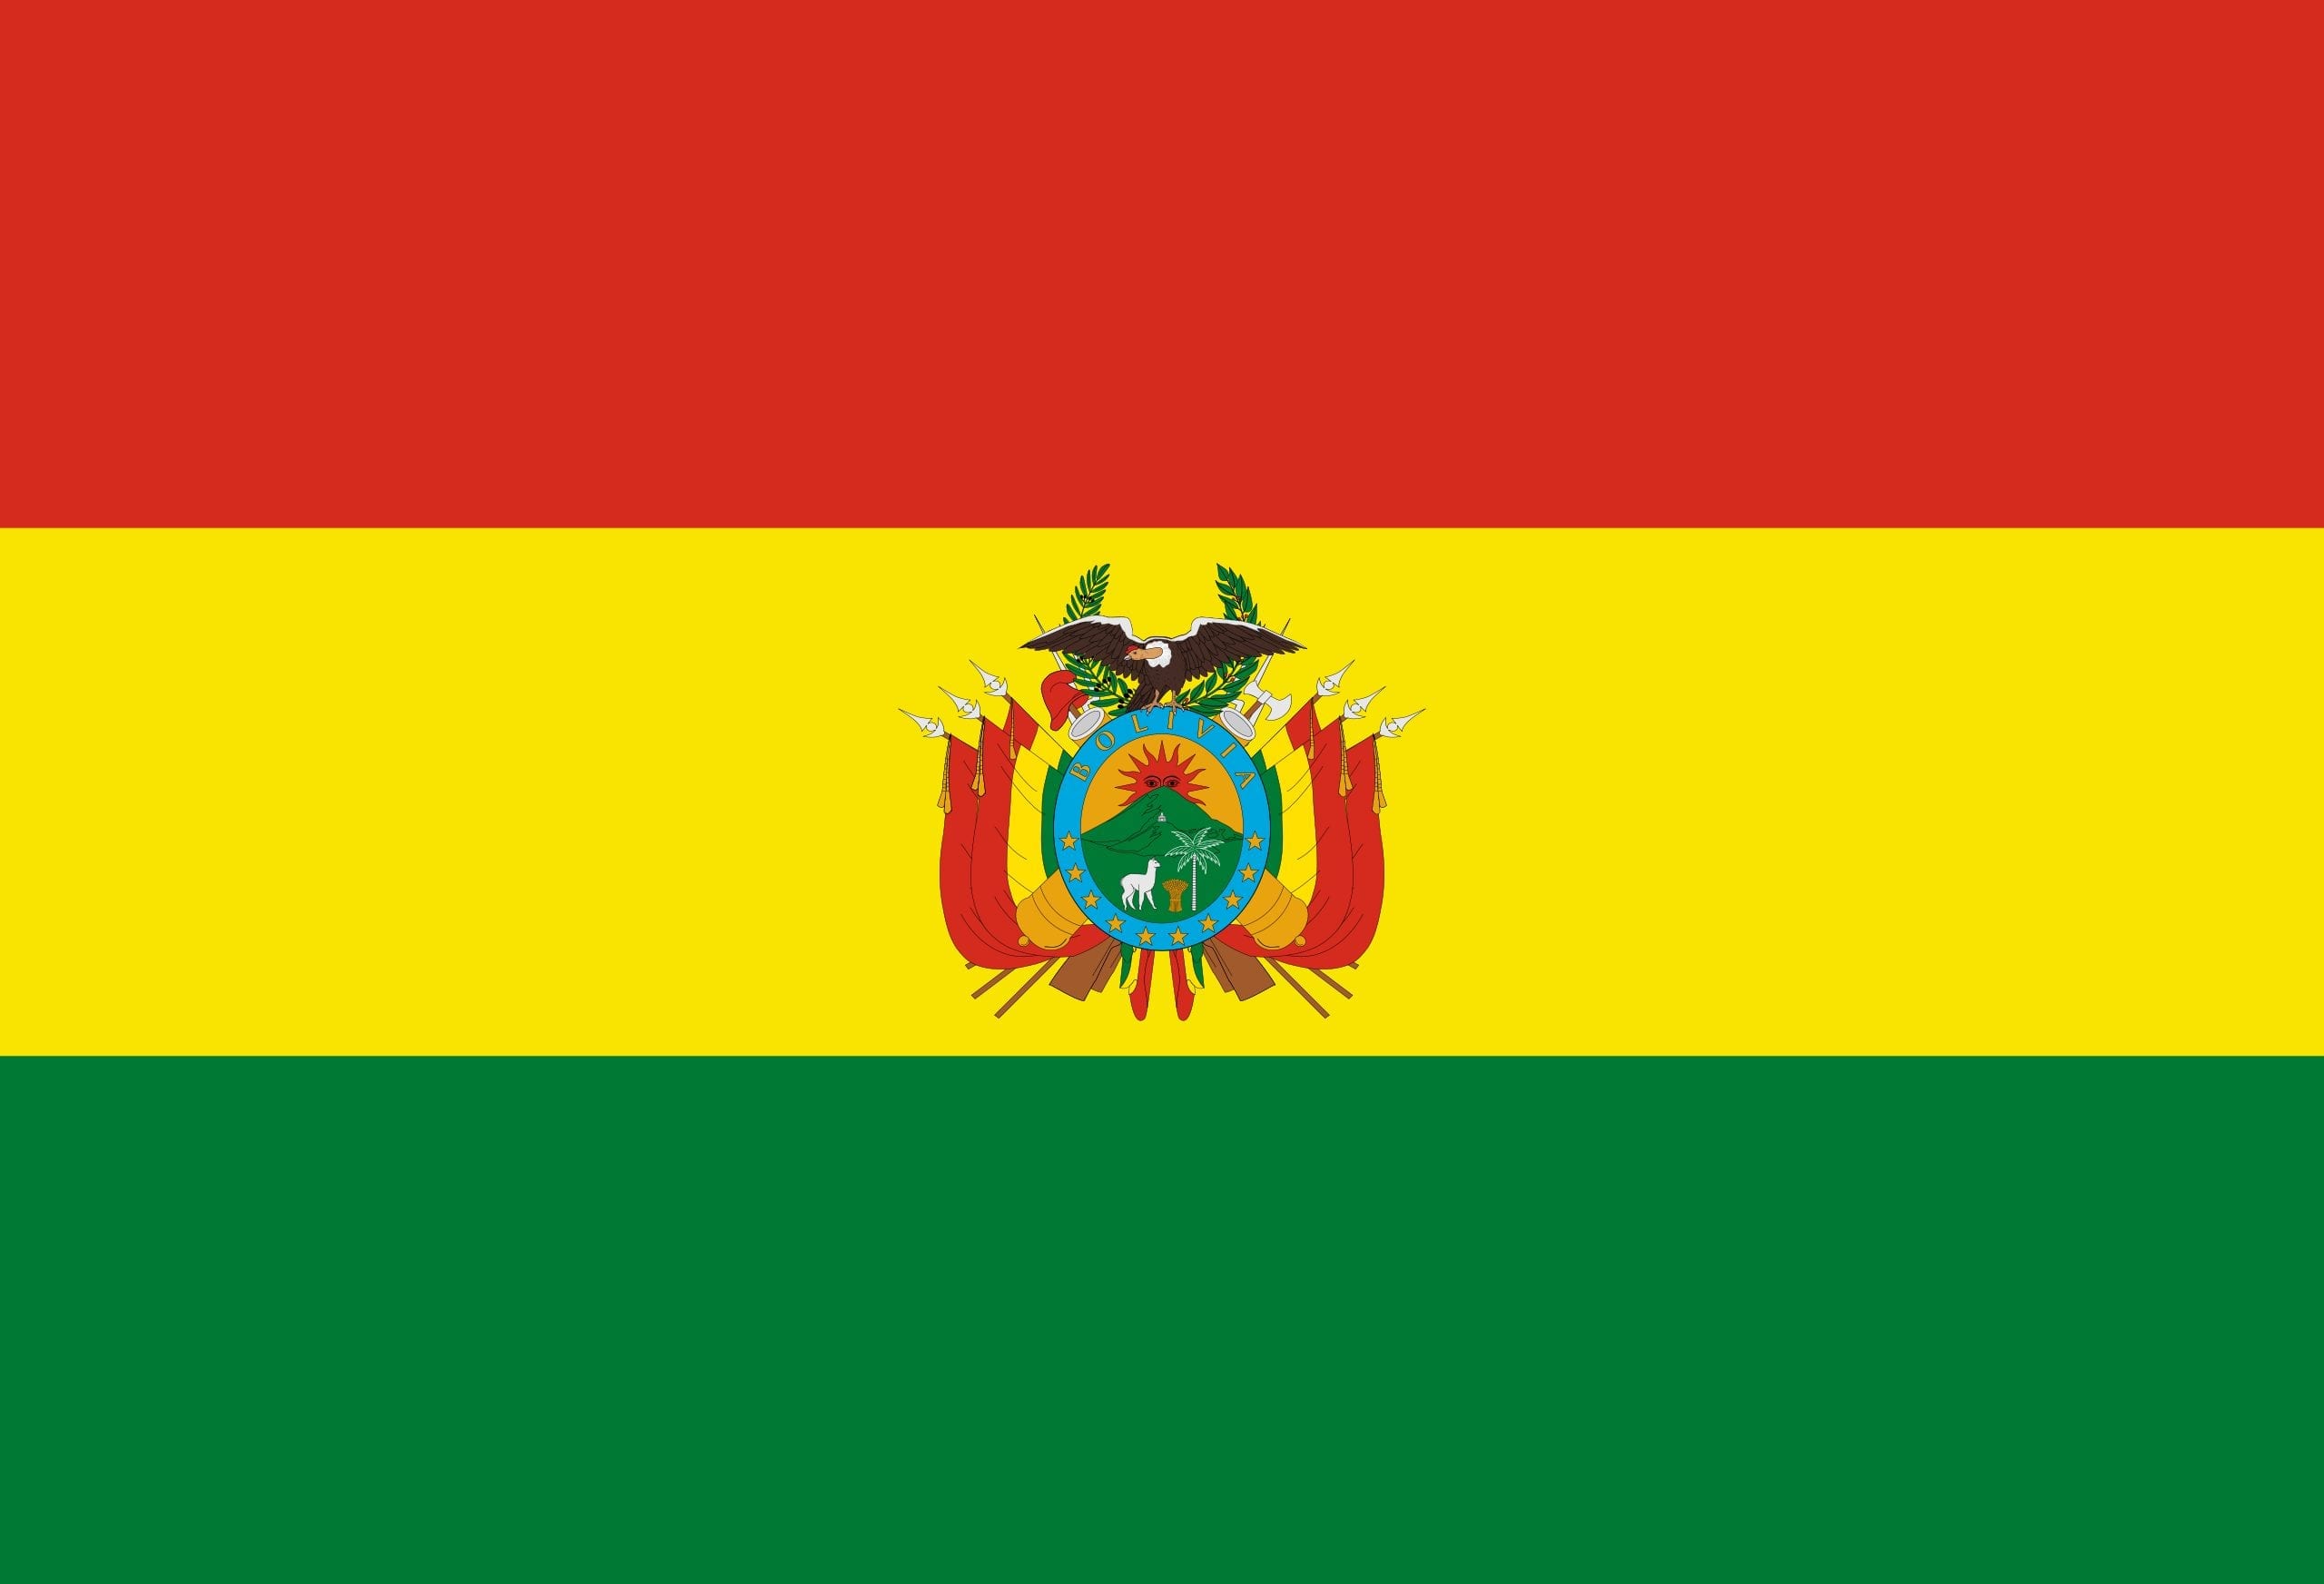 Facts about Bolivia